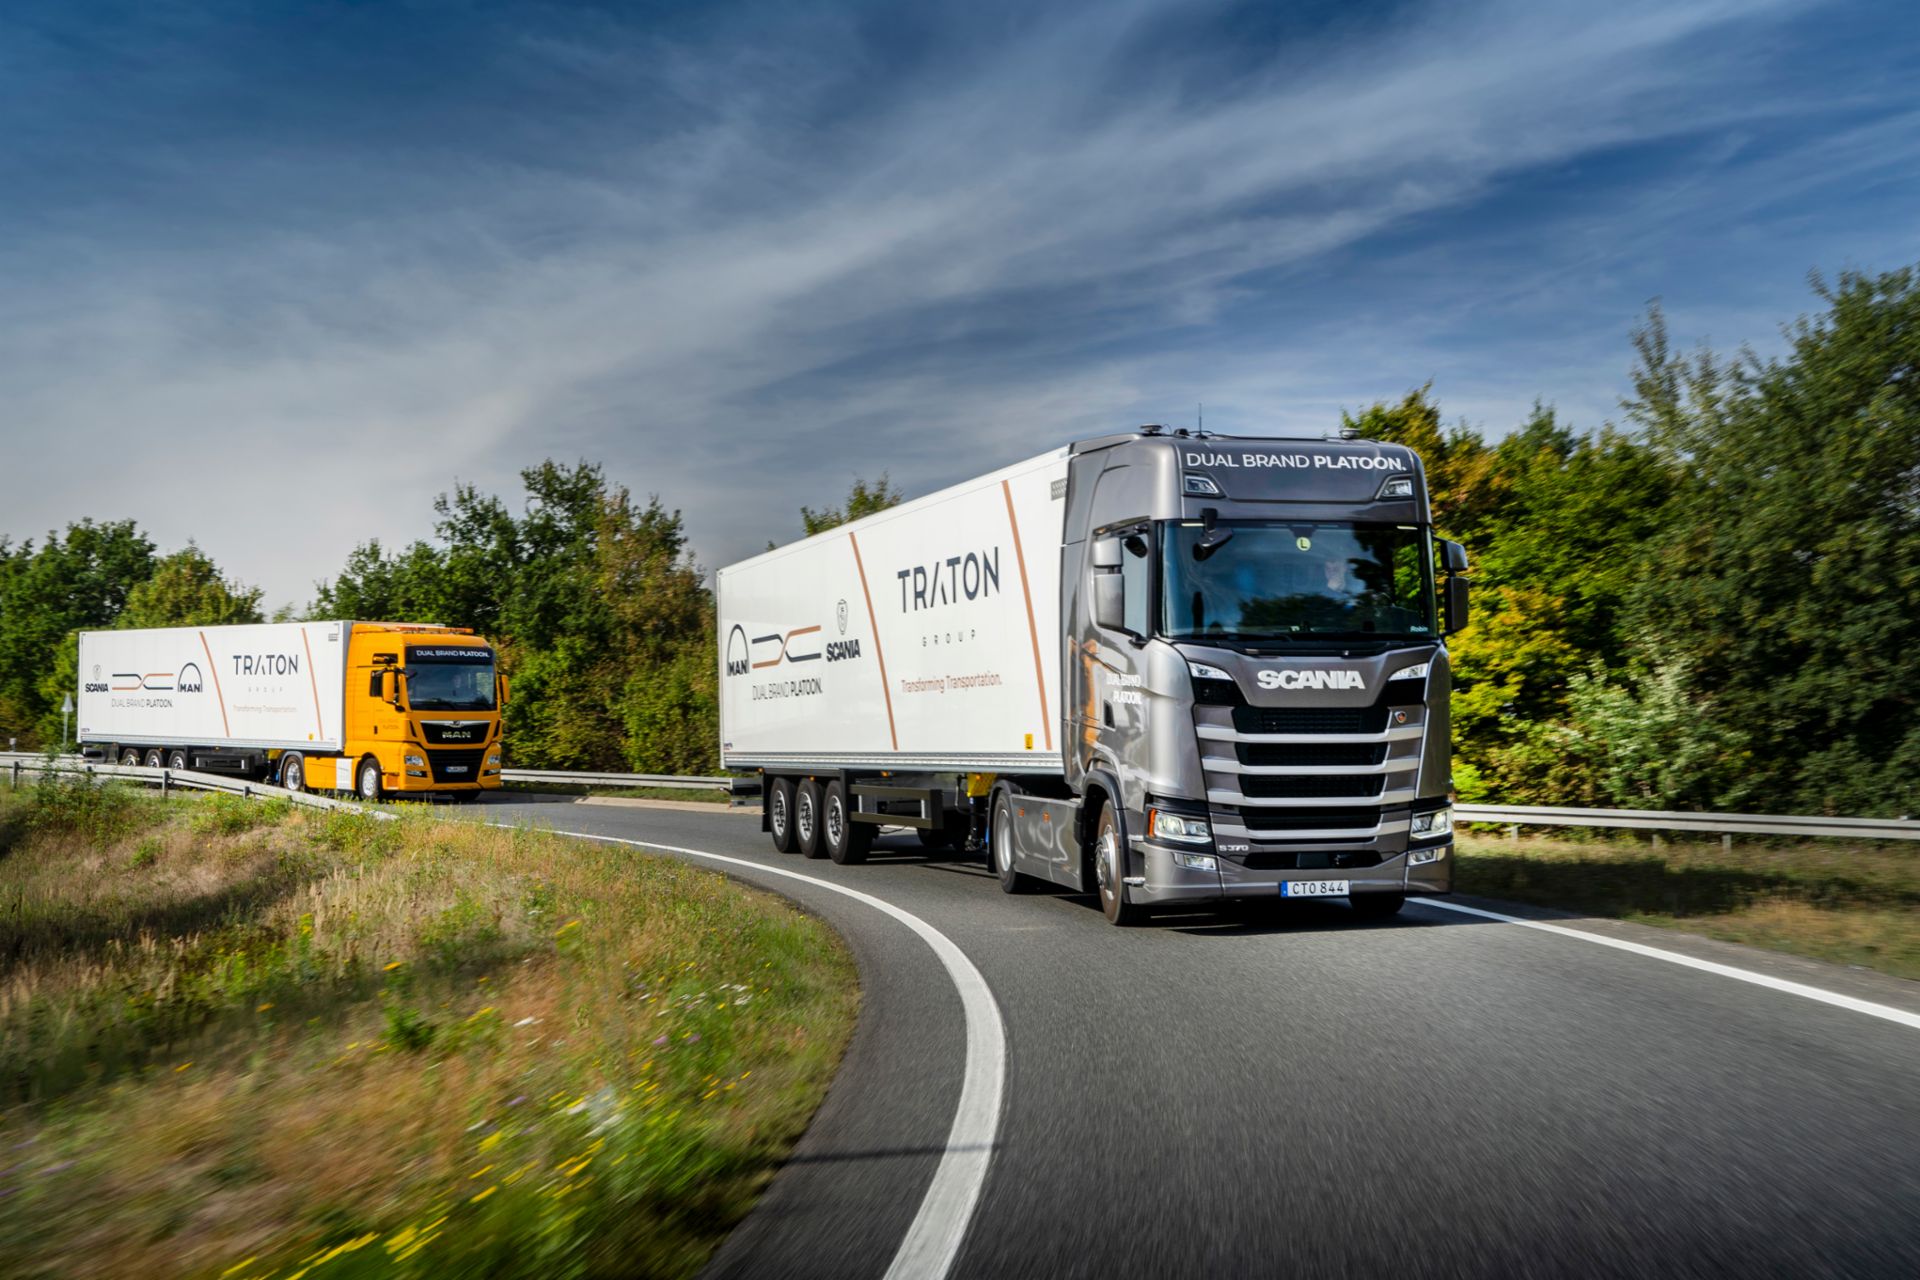 Two brands, one platoon: MAN and Scania are working hand in hand on dual-brand platooning.
                 